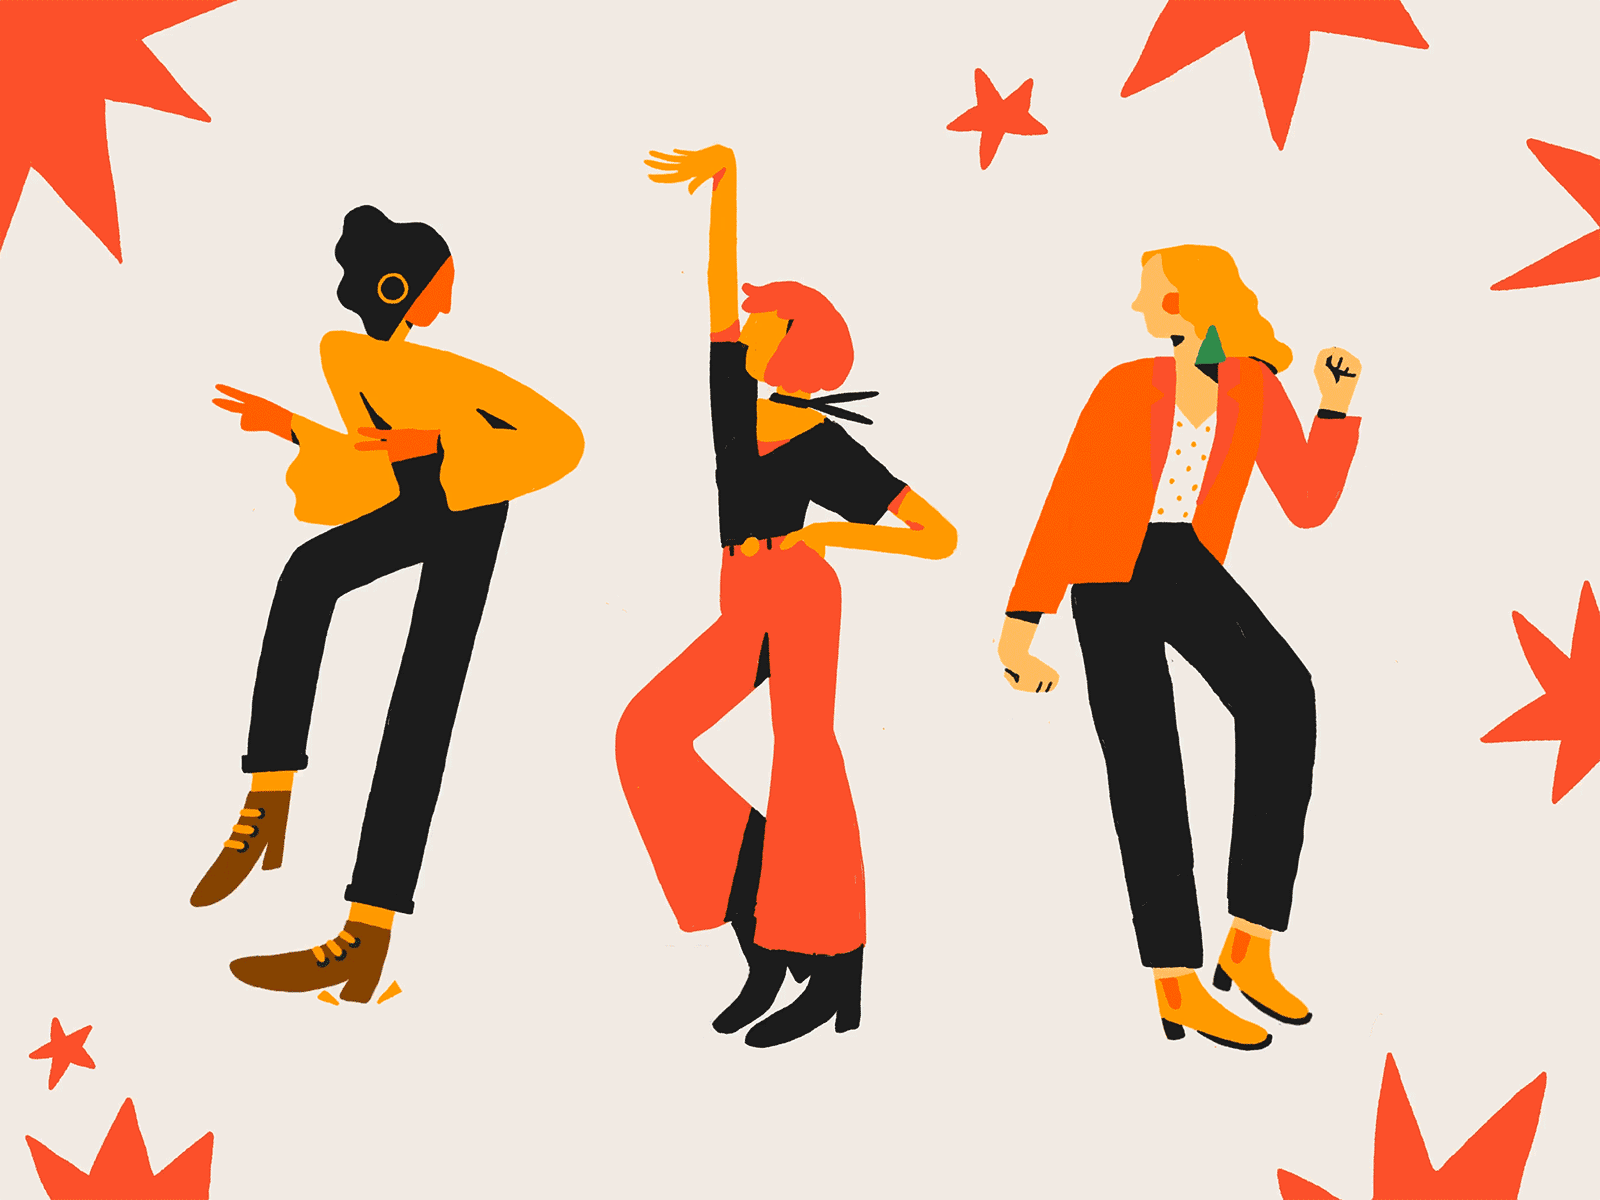 ✦Party girls✦ 2d 2d character 2danimation animation dance dancing design girls illustration minimal motion design party people shape simple star vector